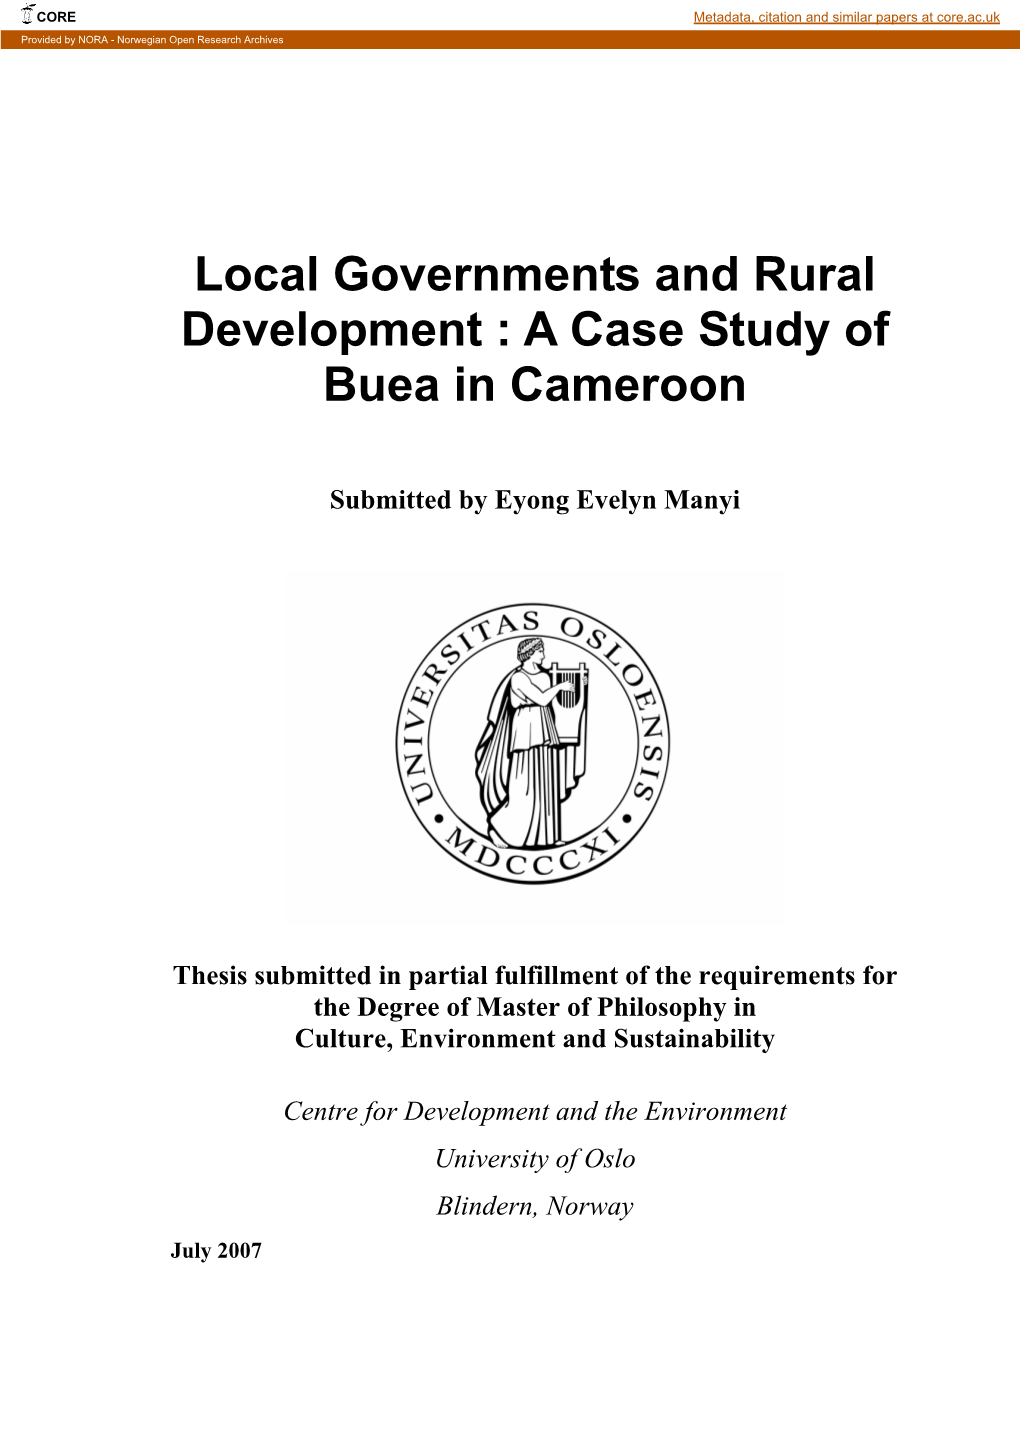 Local Governments and Rural Development : a Case Study of Buea in Cameroon